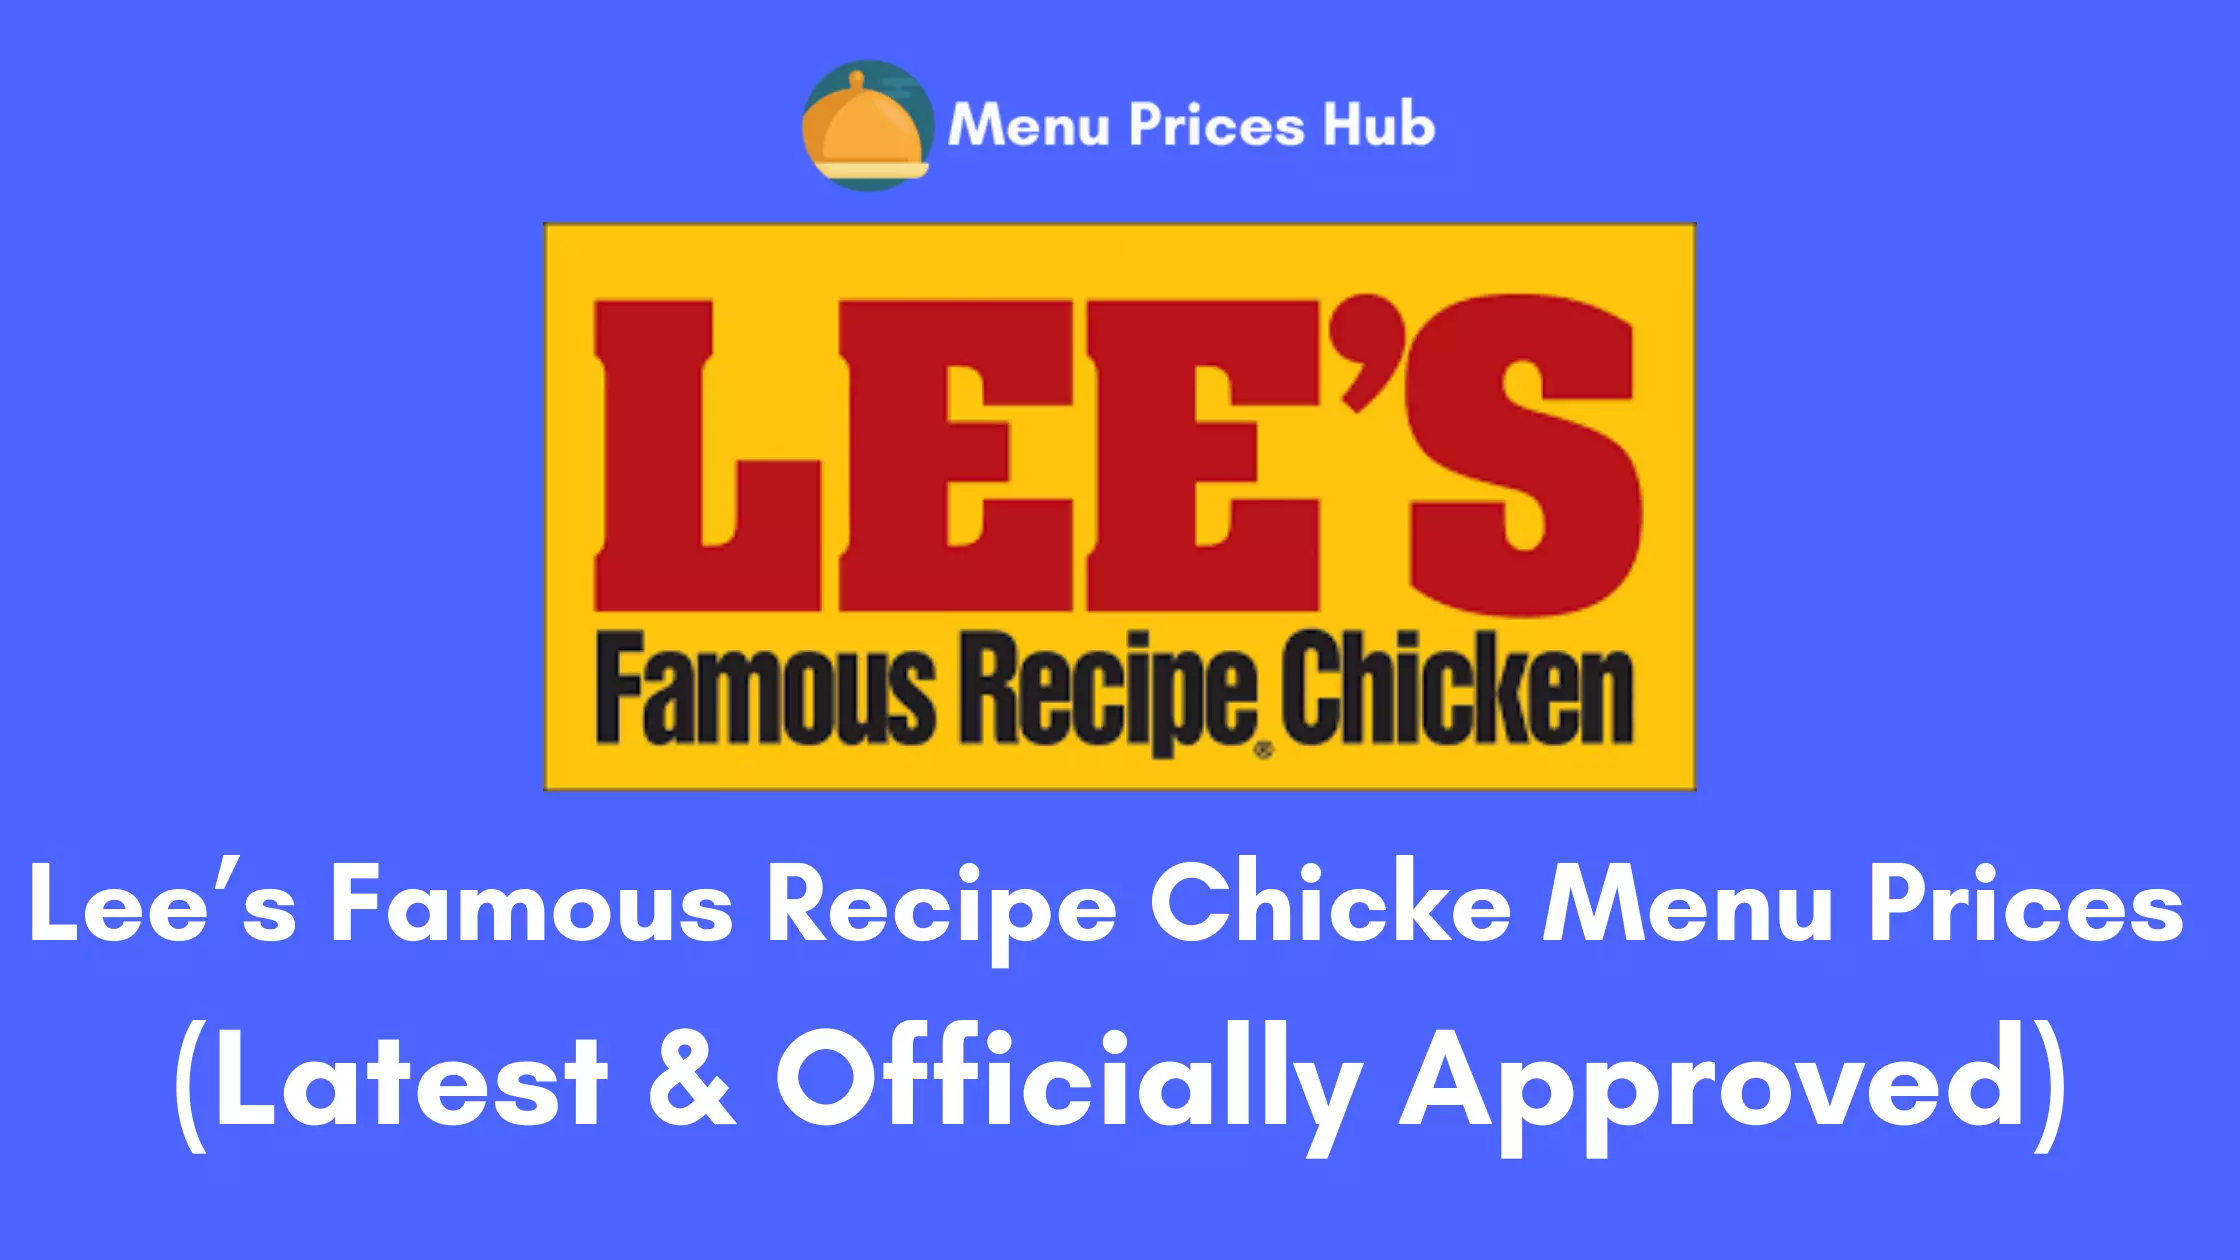 Lee’s Famous Recipe Chicken Menu Prices